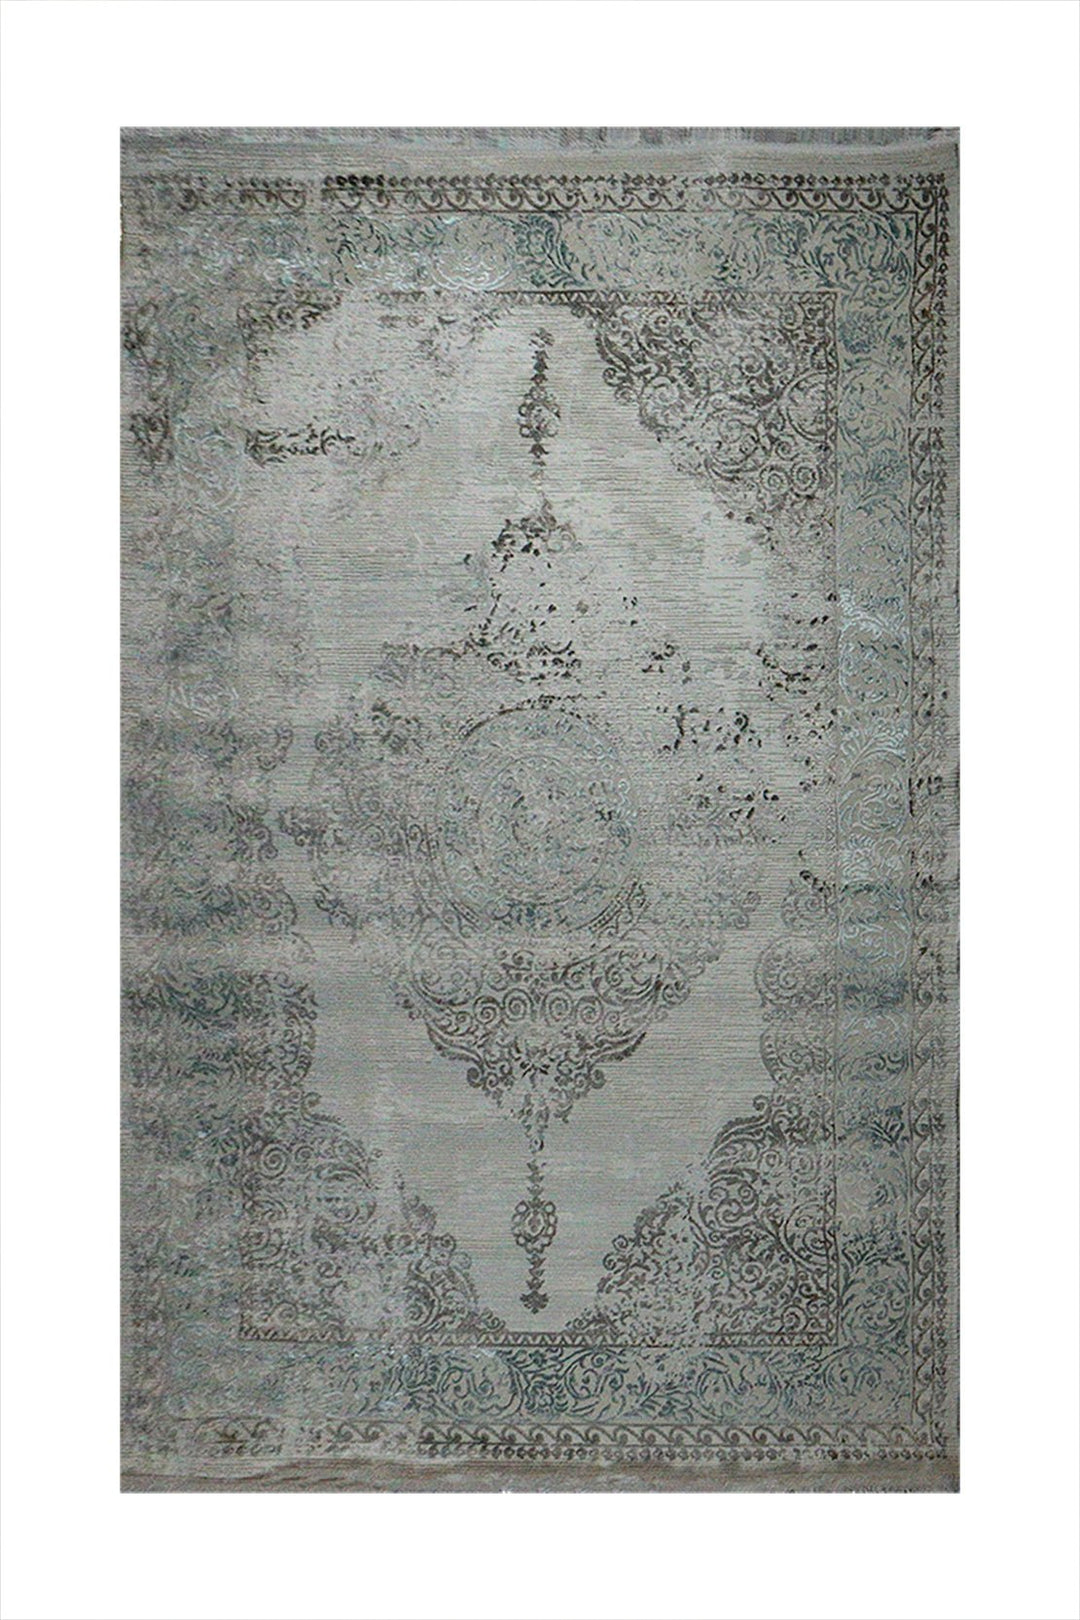 Turkish Modern Festival 1 Rug - 6.5 x 9.5 FT - Blue and Gray - Sleek and Minimalist for Chic Interiors - V Surfaces